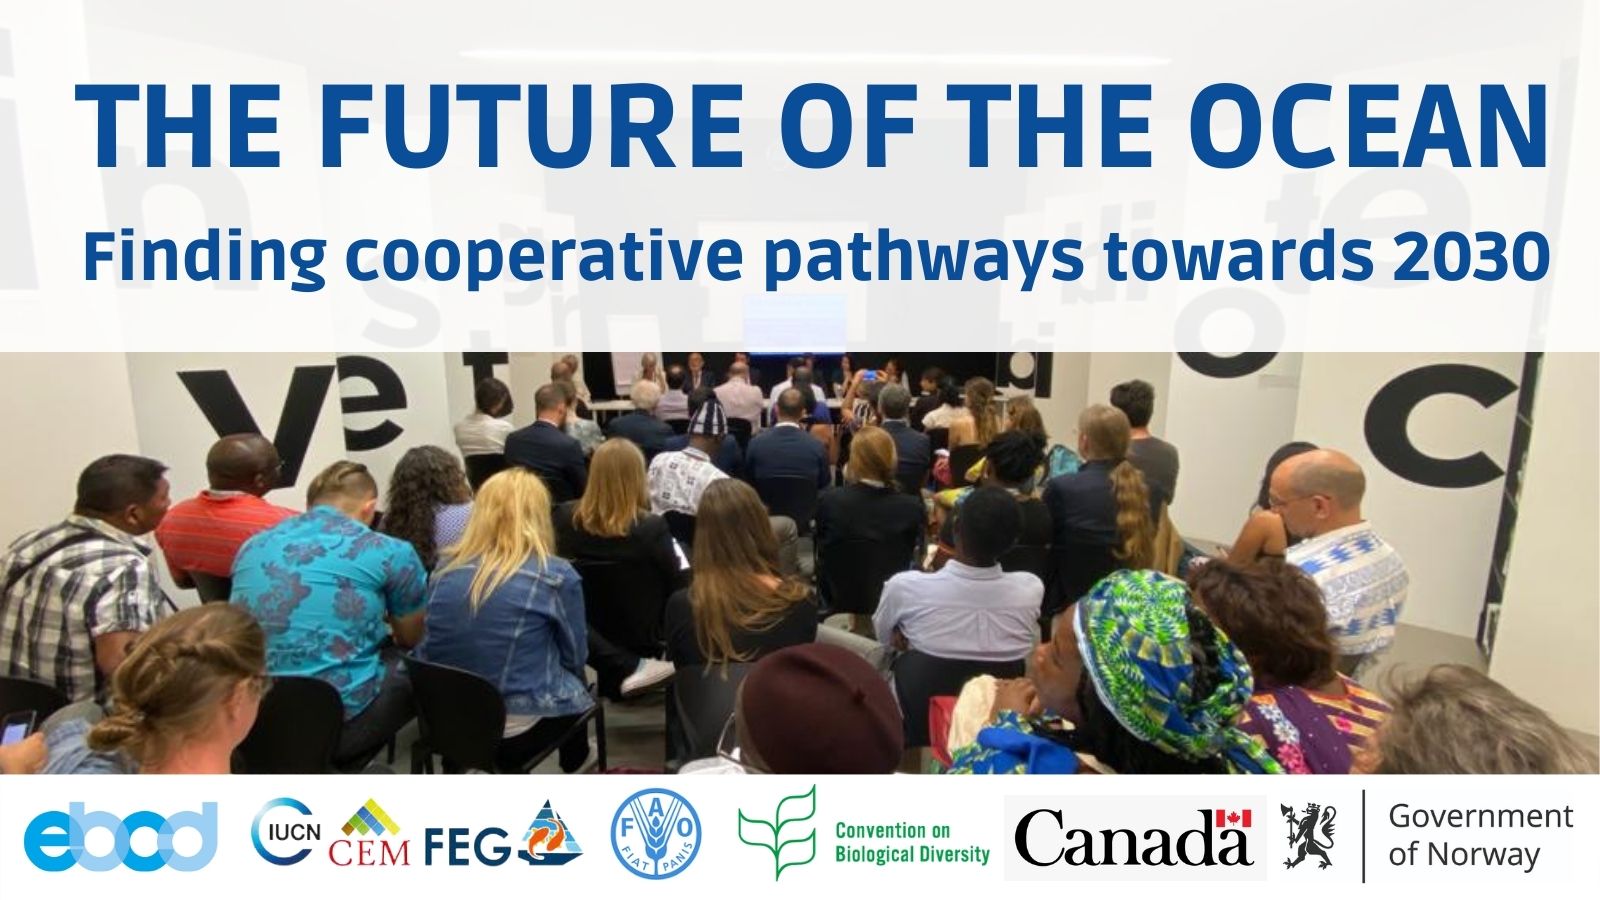 Press release – The Future of the Ocean: Finding cooperative pathways towards 2030